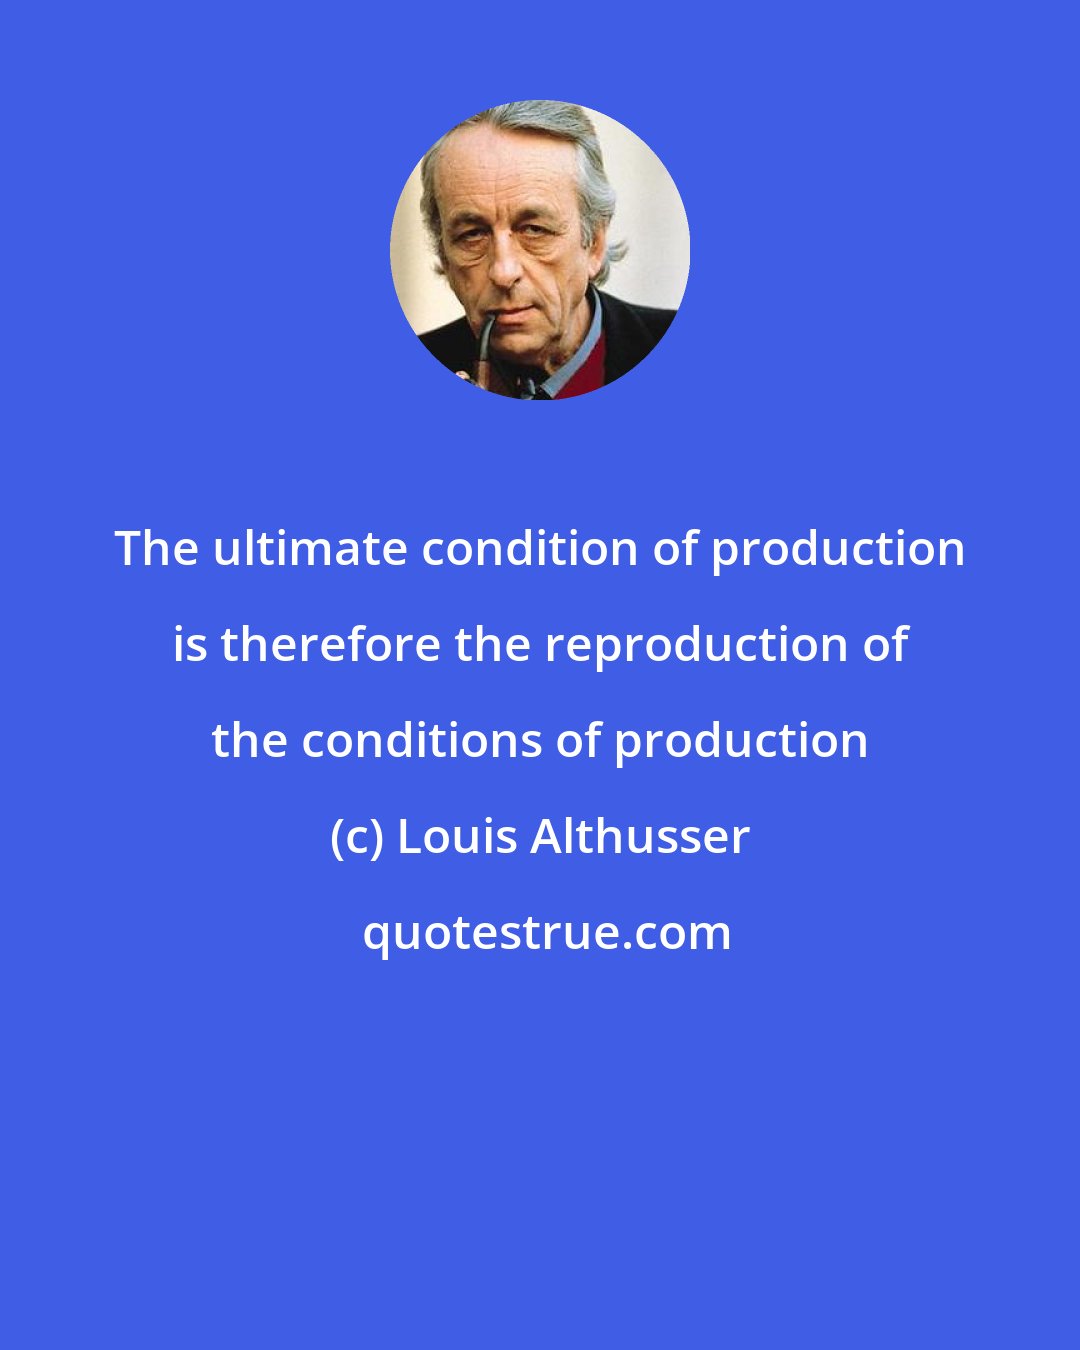 Louis Althusser: The ultimate condition of production is therefore the reproduction of the conditions of production